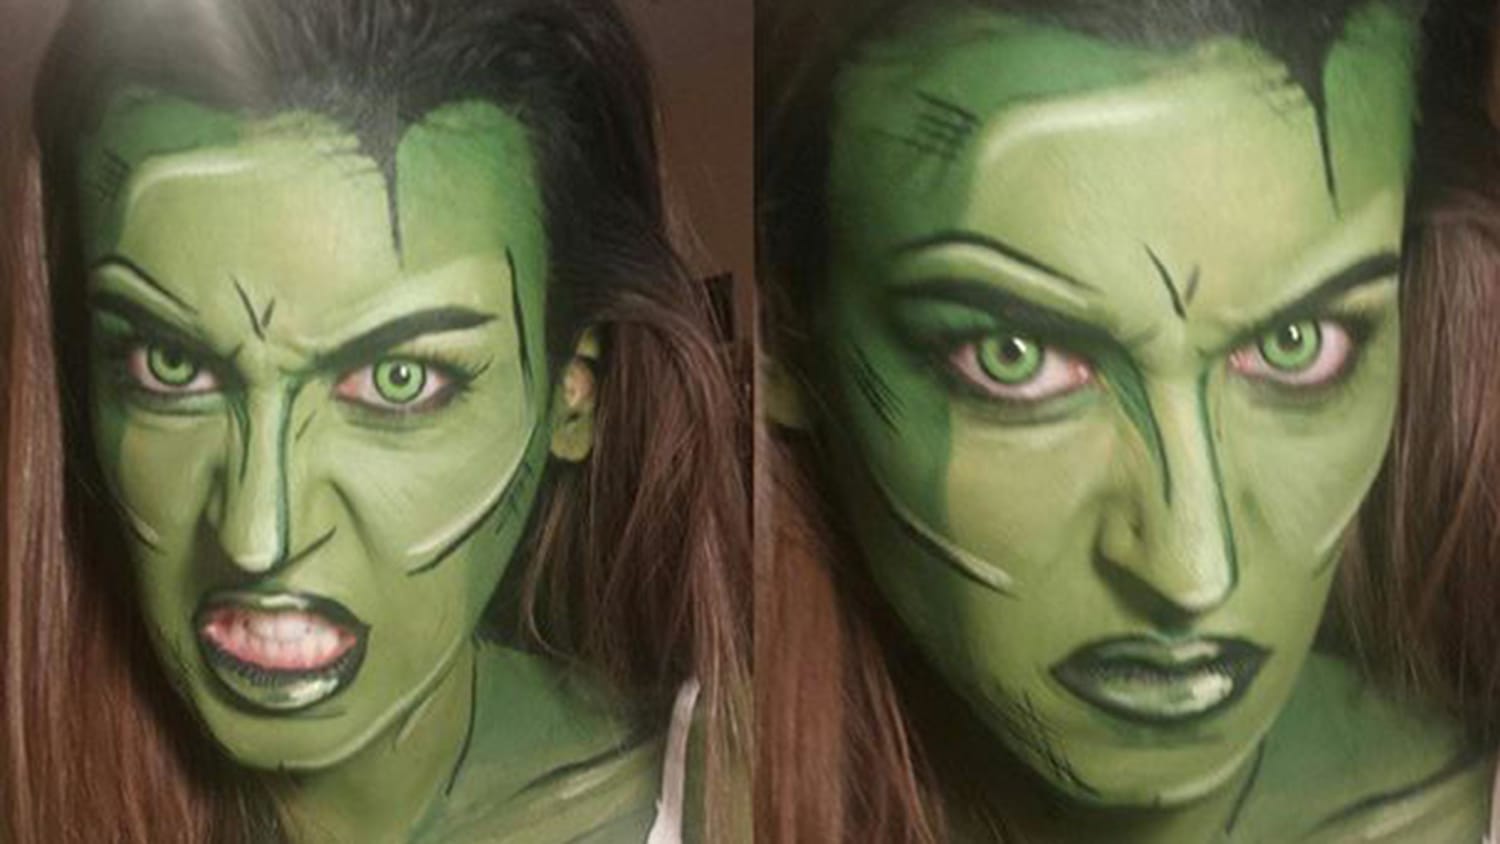 Makeup artist creates transformations with face paint